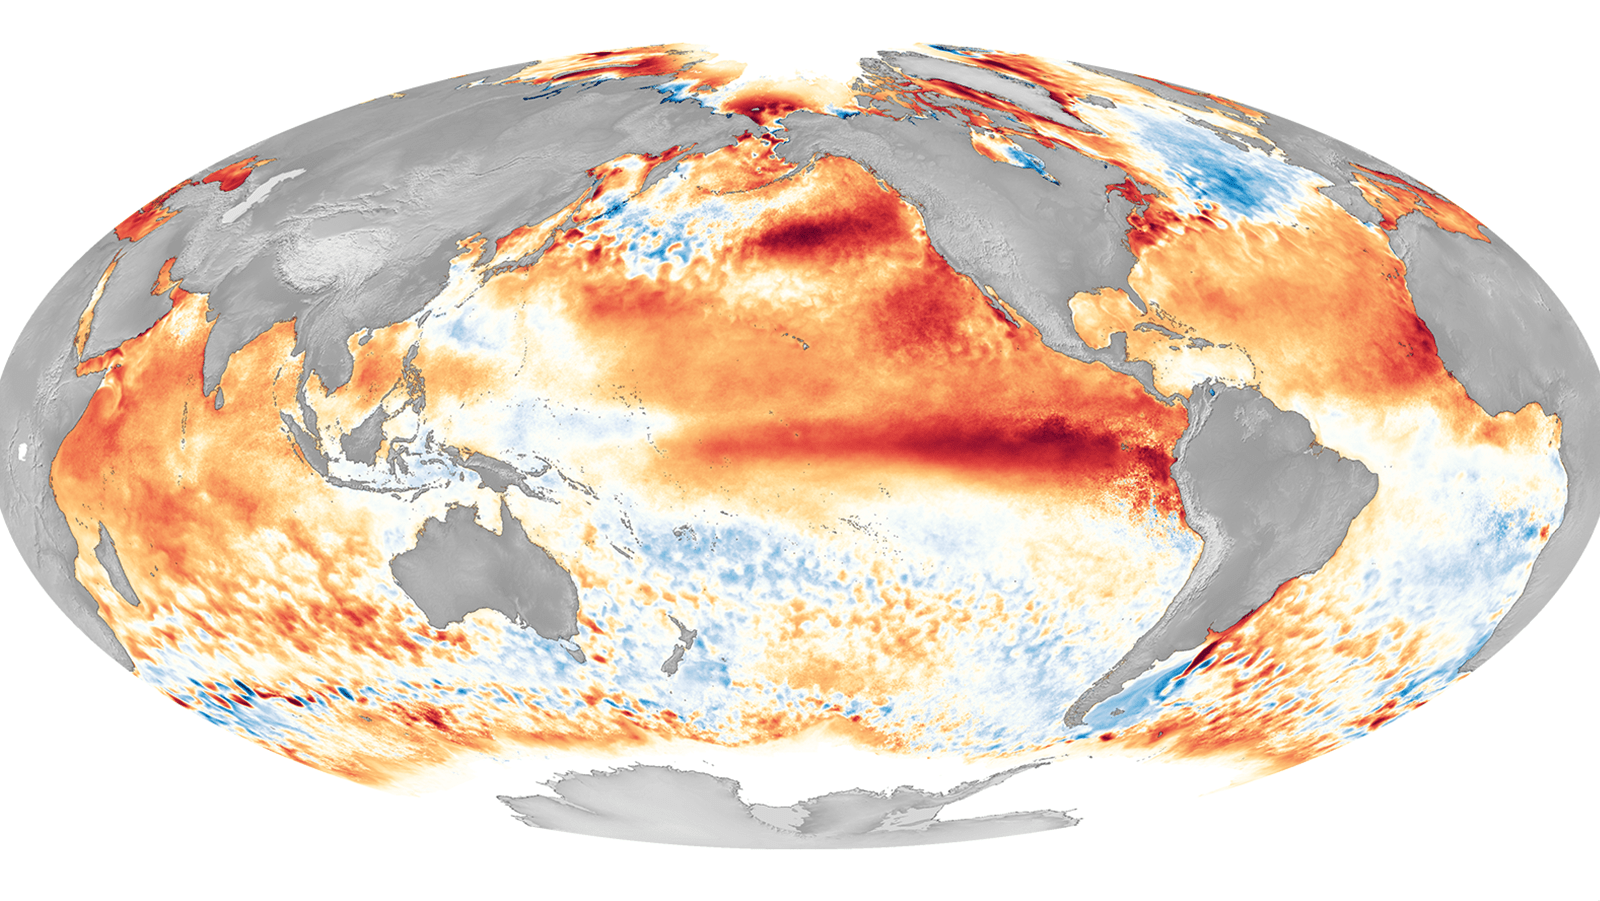 A map showing the sea surface temperatures around the globe. A strong El Nino is shown in dark red in the Pacific Ocean.